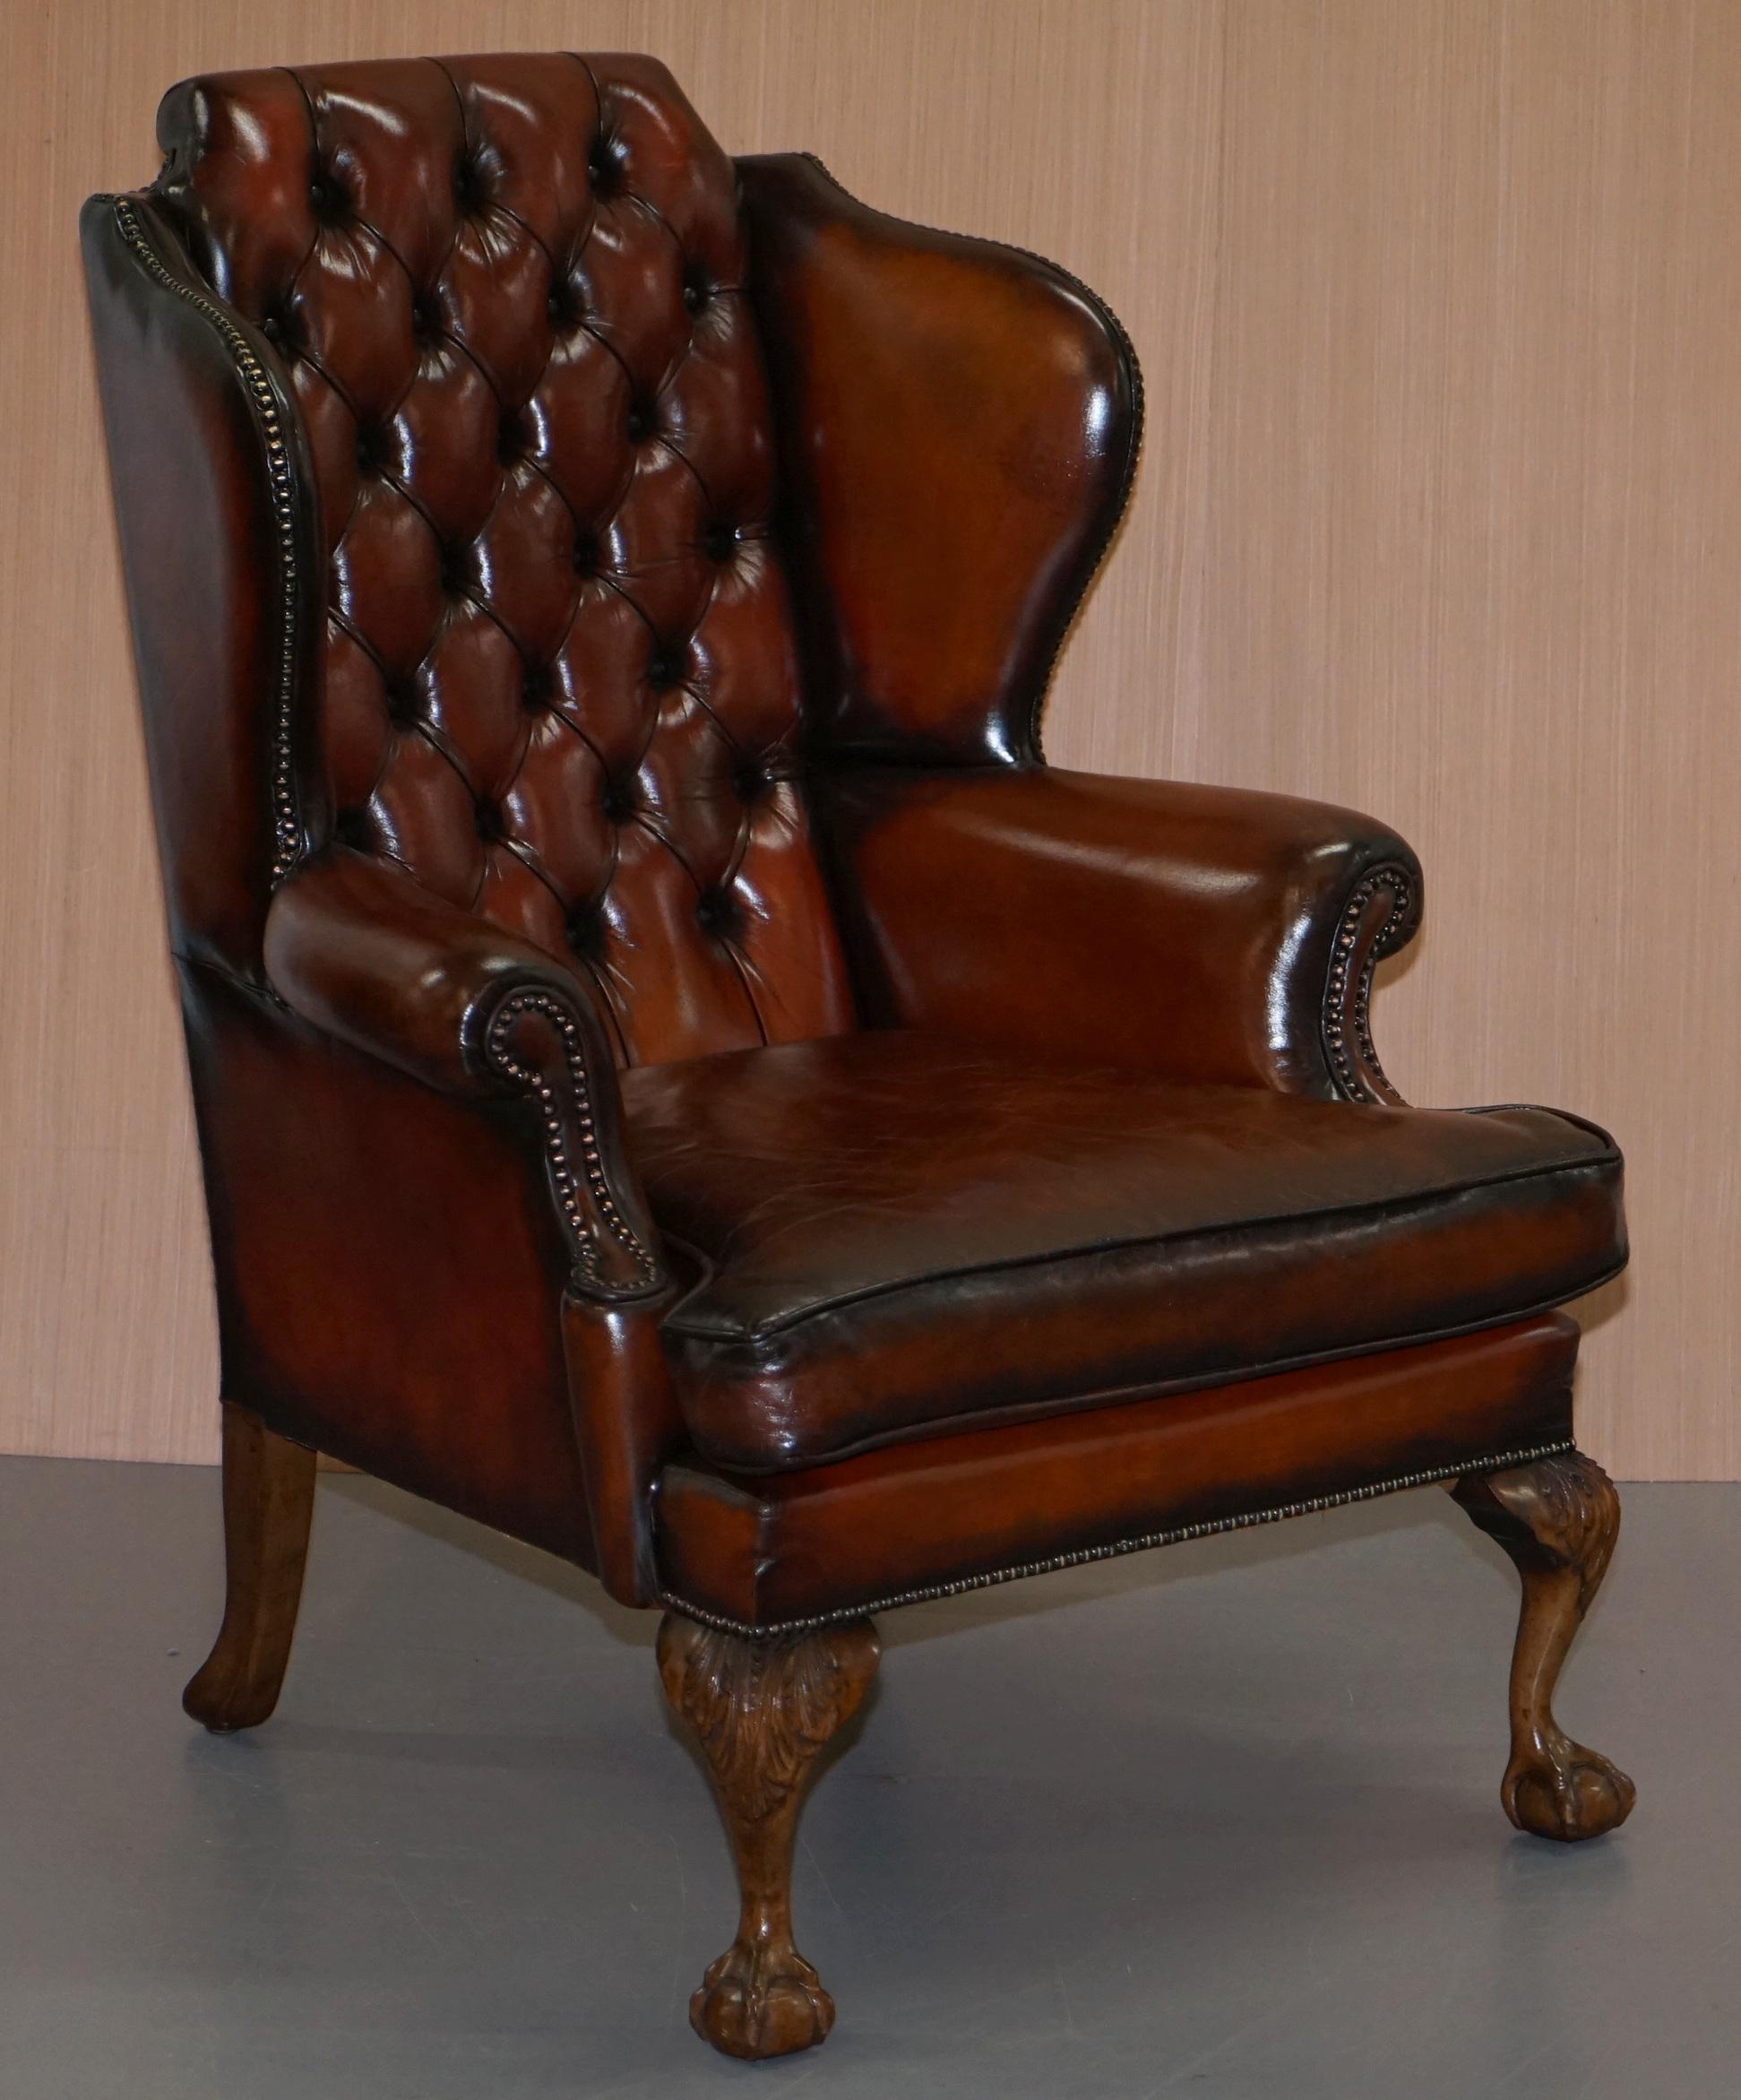 We are delighted to offer for sale this stunning pair of lovely Chesterfield Claw & Ball feet fully restored vintage wingback armchairs in cigar brown leather with thick heavy feather filled cushions

A good looking and comfortable pair of coil